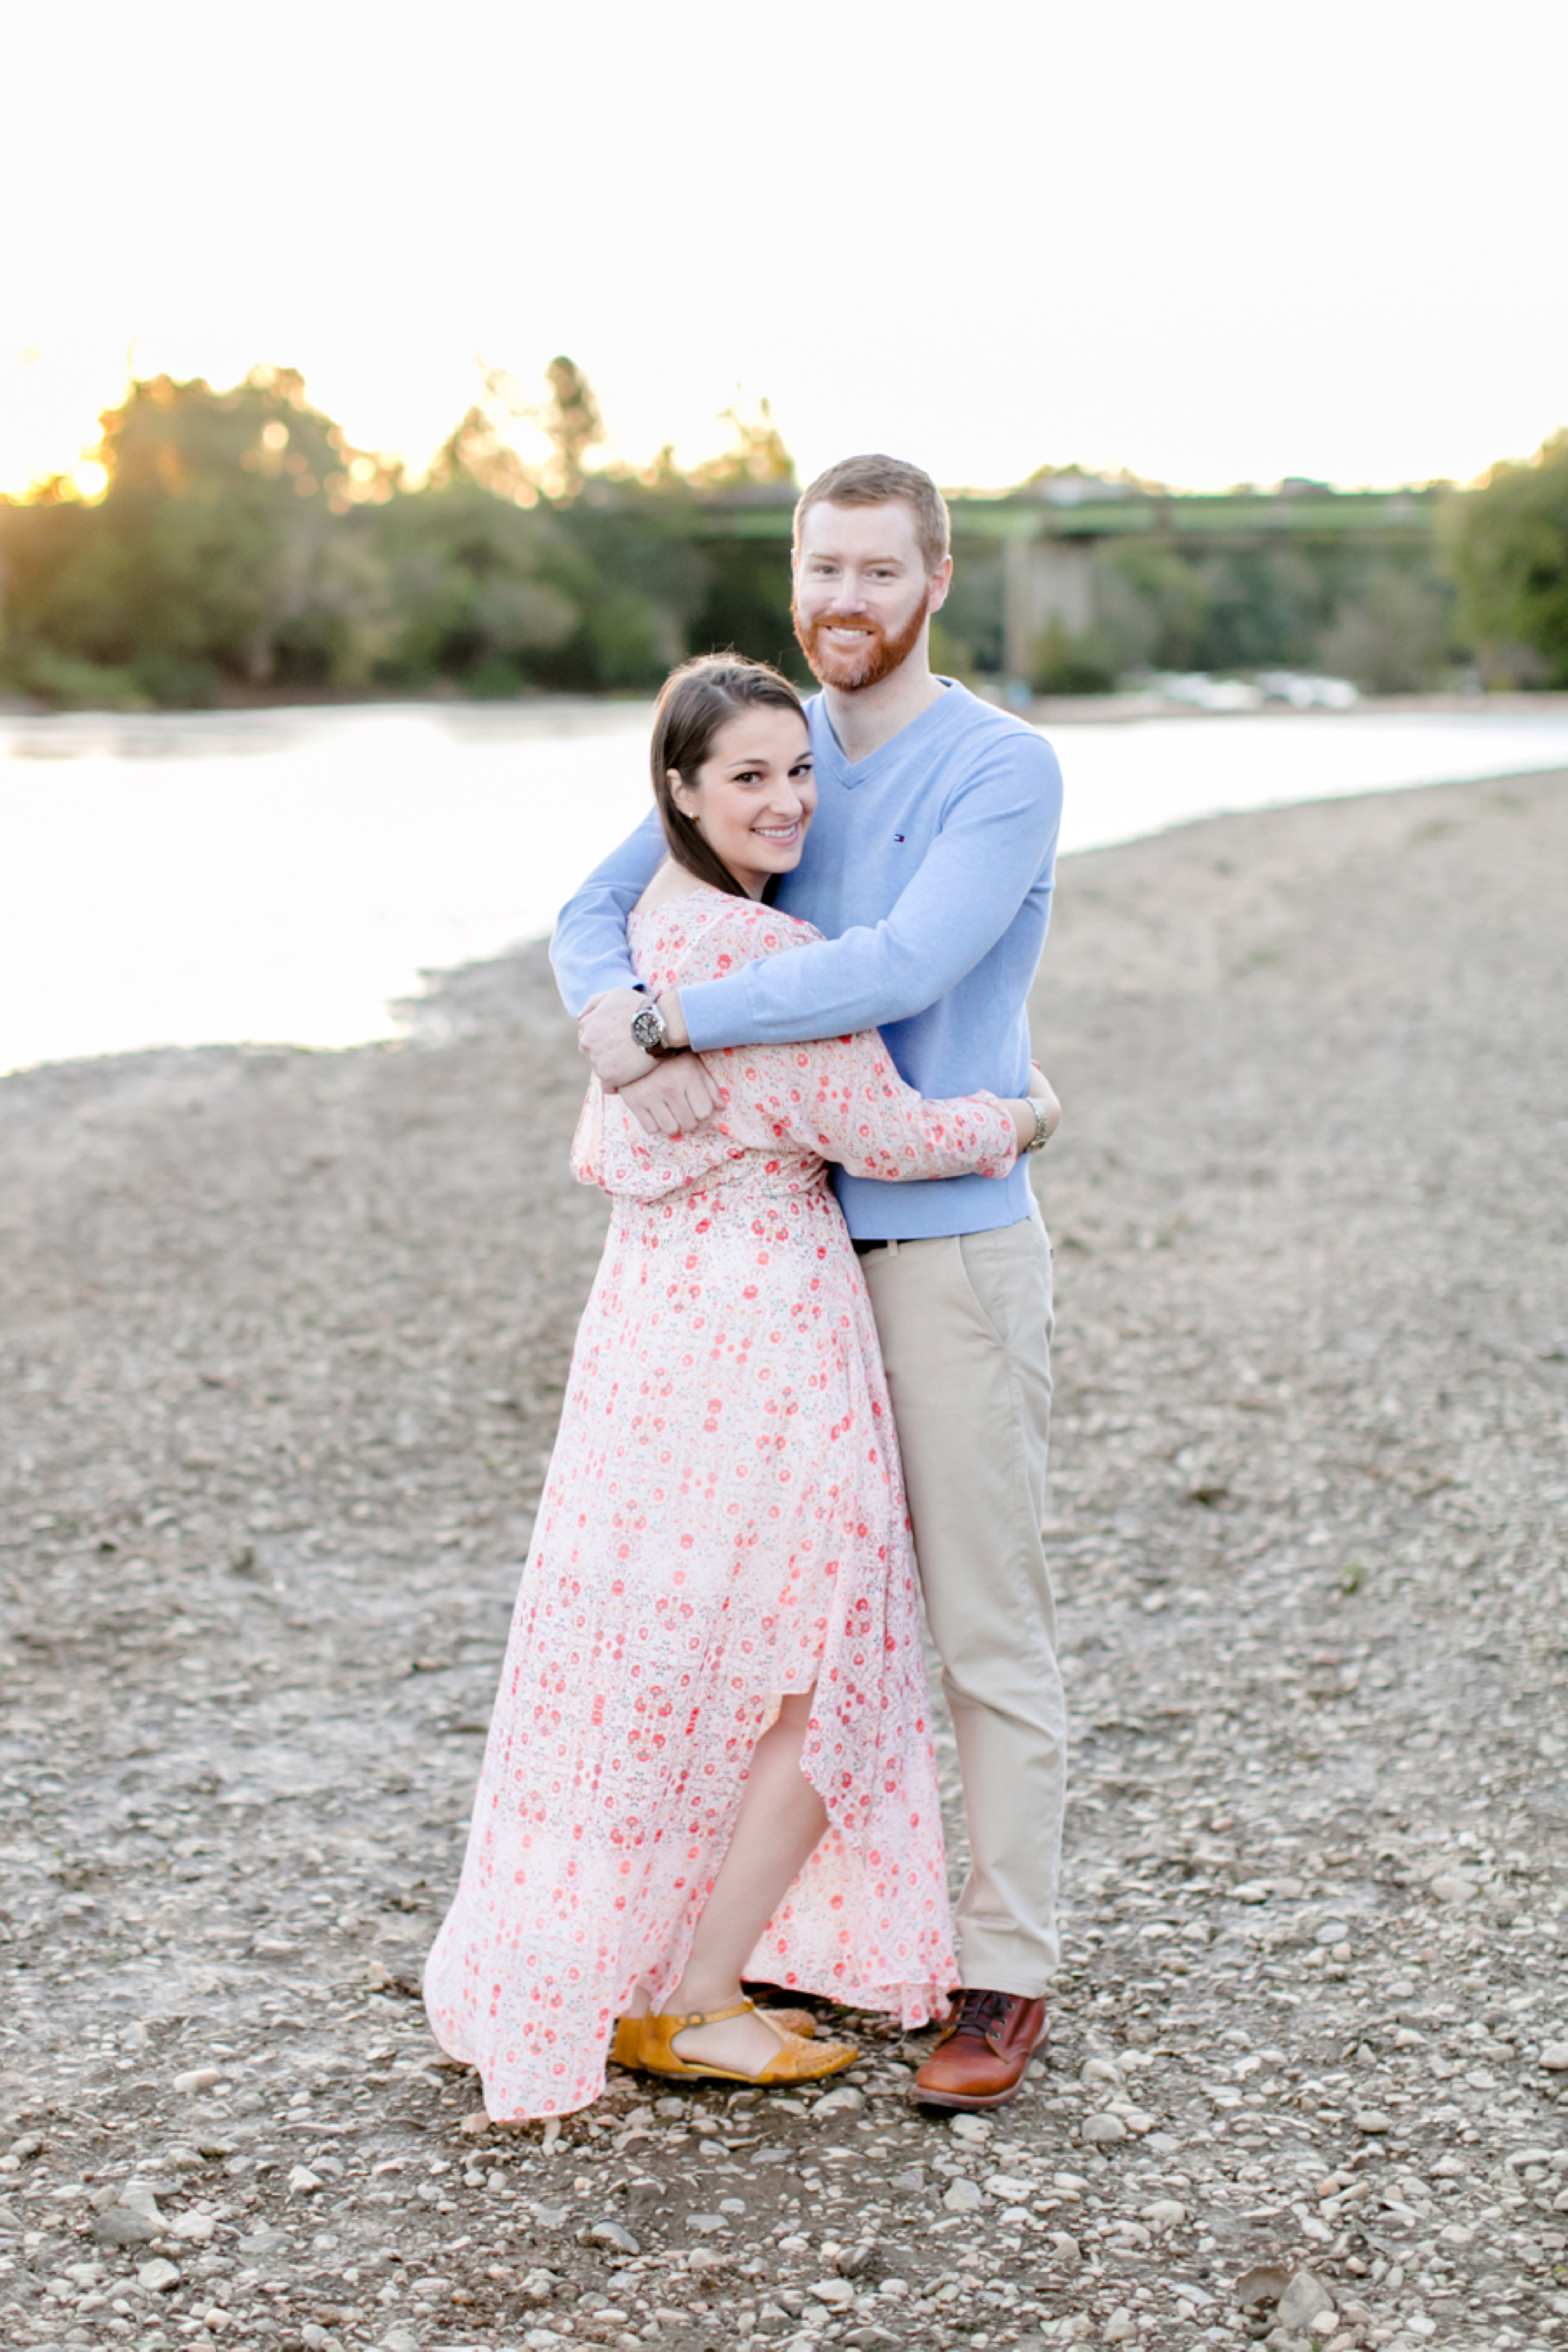 37downtown-fredericksburg-virginia-engagement-session-sarah-and-russell-1073